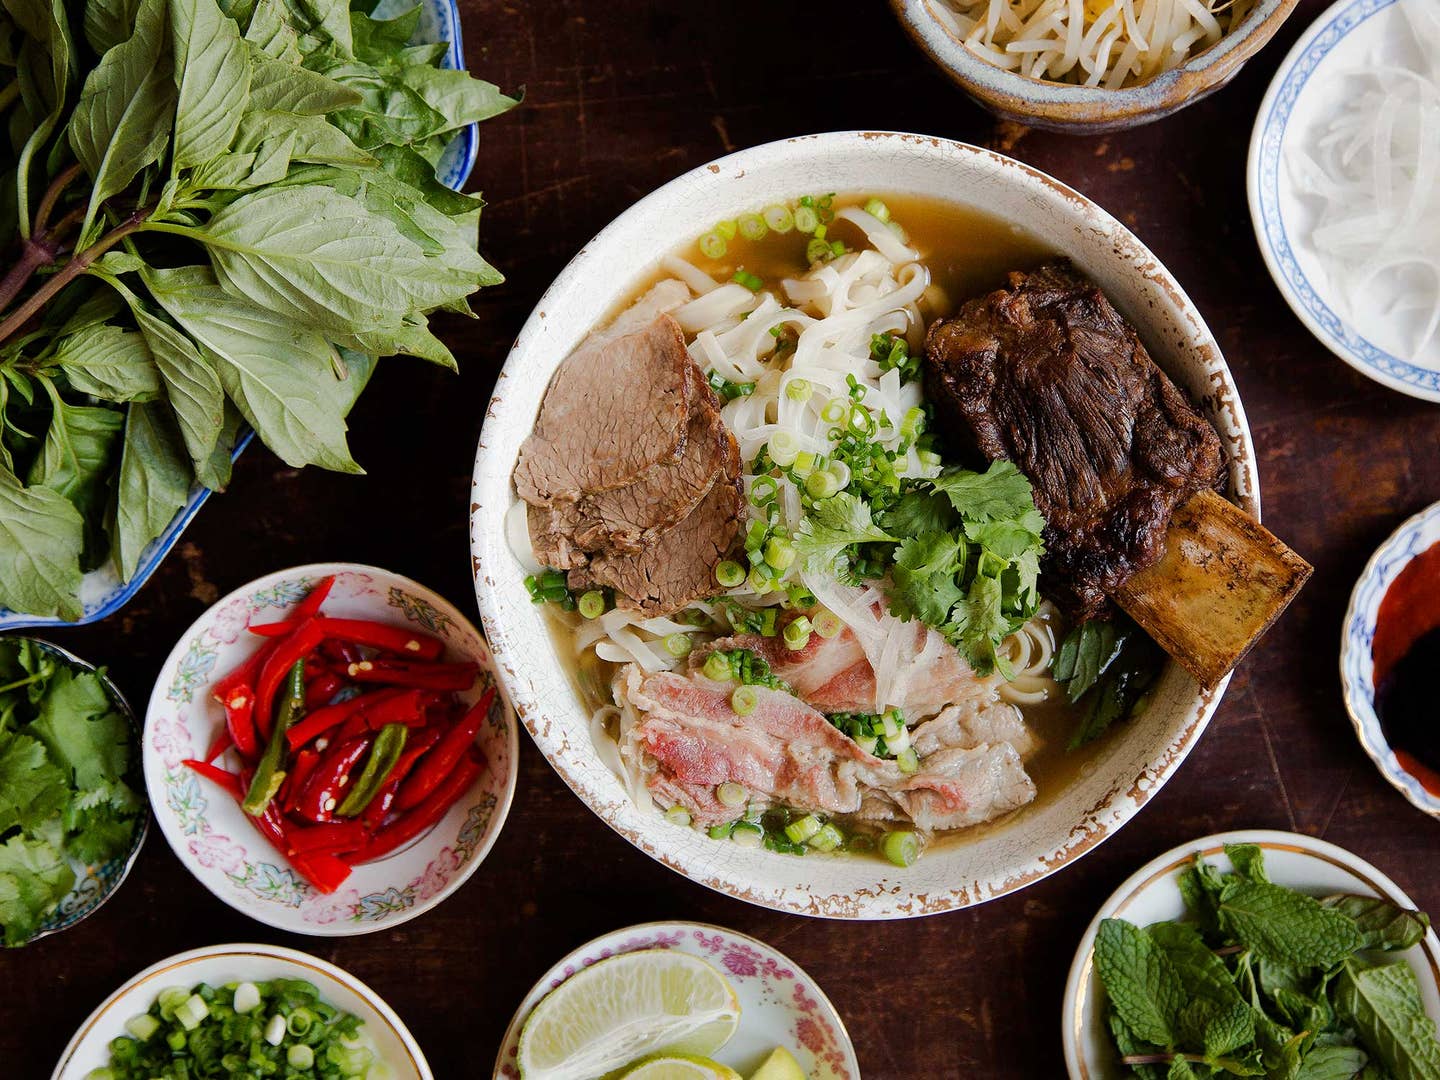 The Best Pho in NYC Comes With an Unusual Add-In